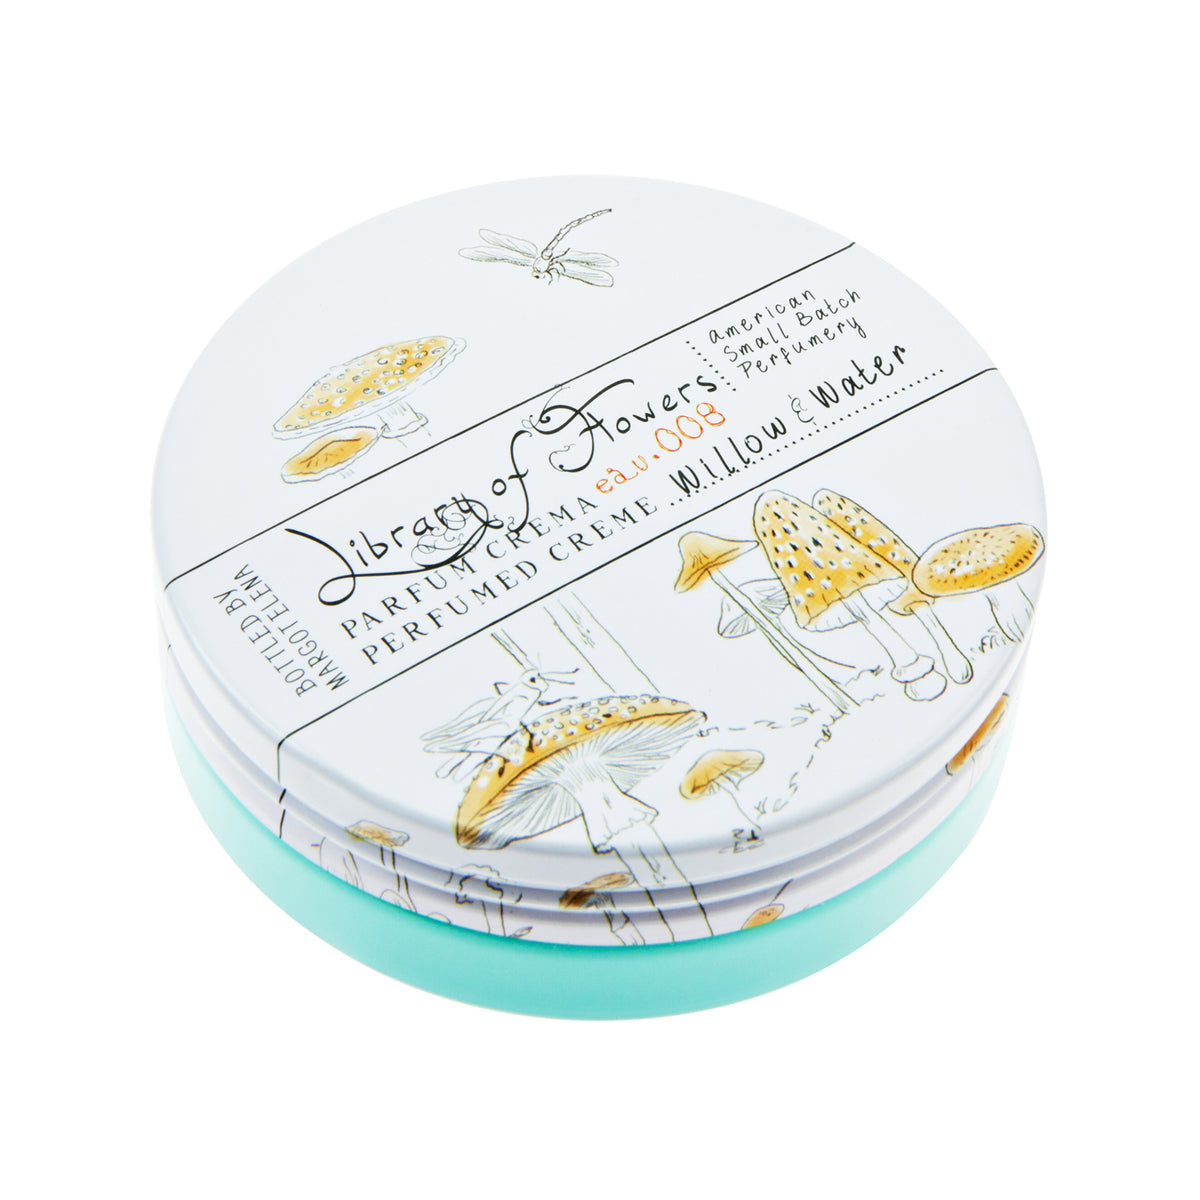 A round, decorative tin of moisturizing Willow & Water Parfum Crema labeled "Margot Elena" with sketches of mushrooms, a butterfly, and plants on a white background.